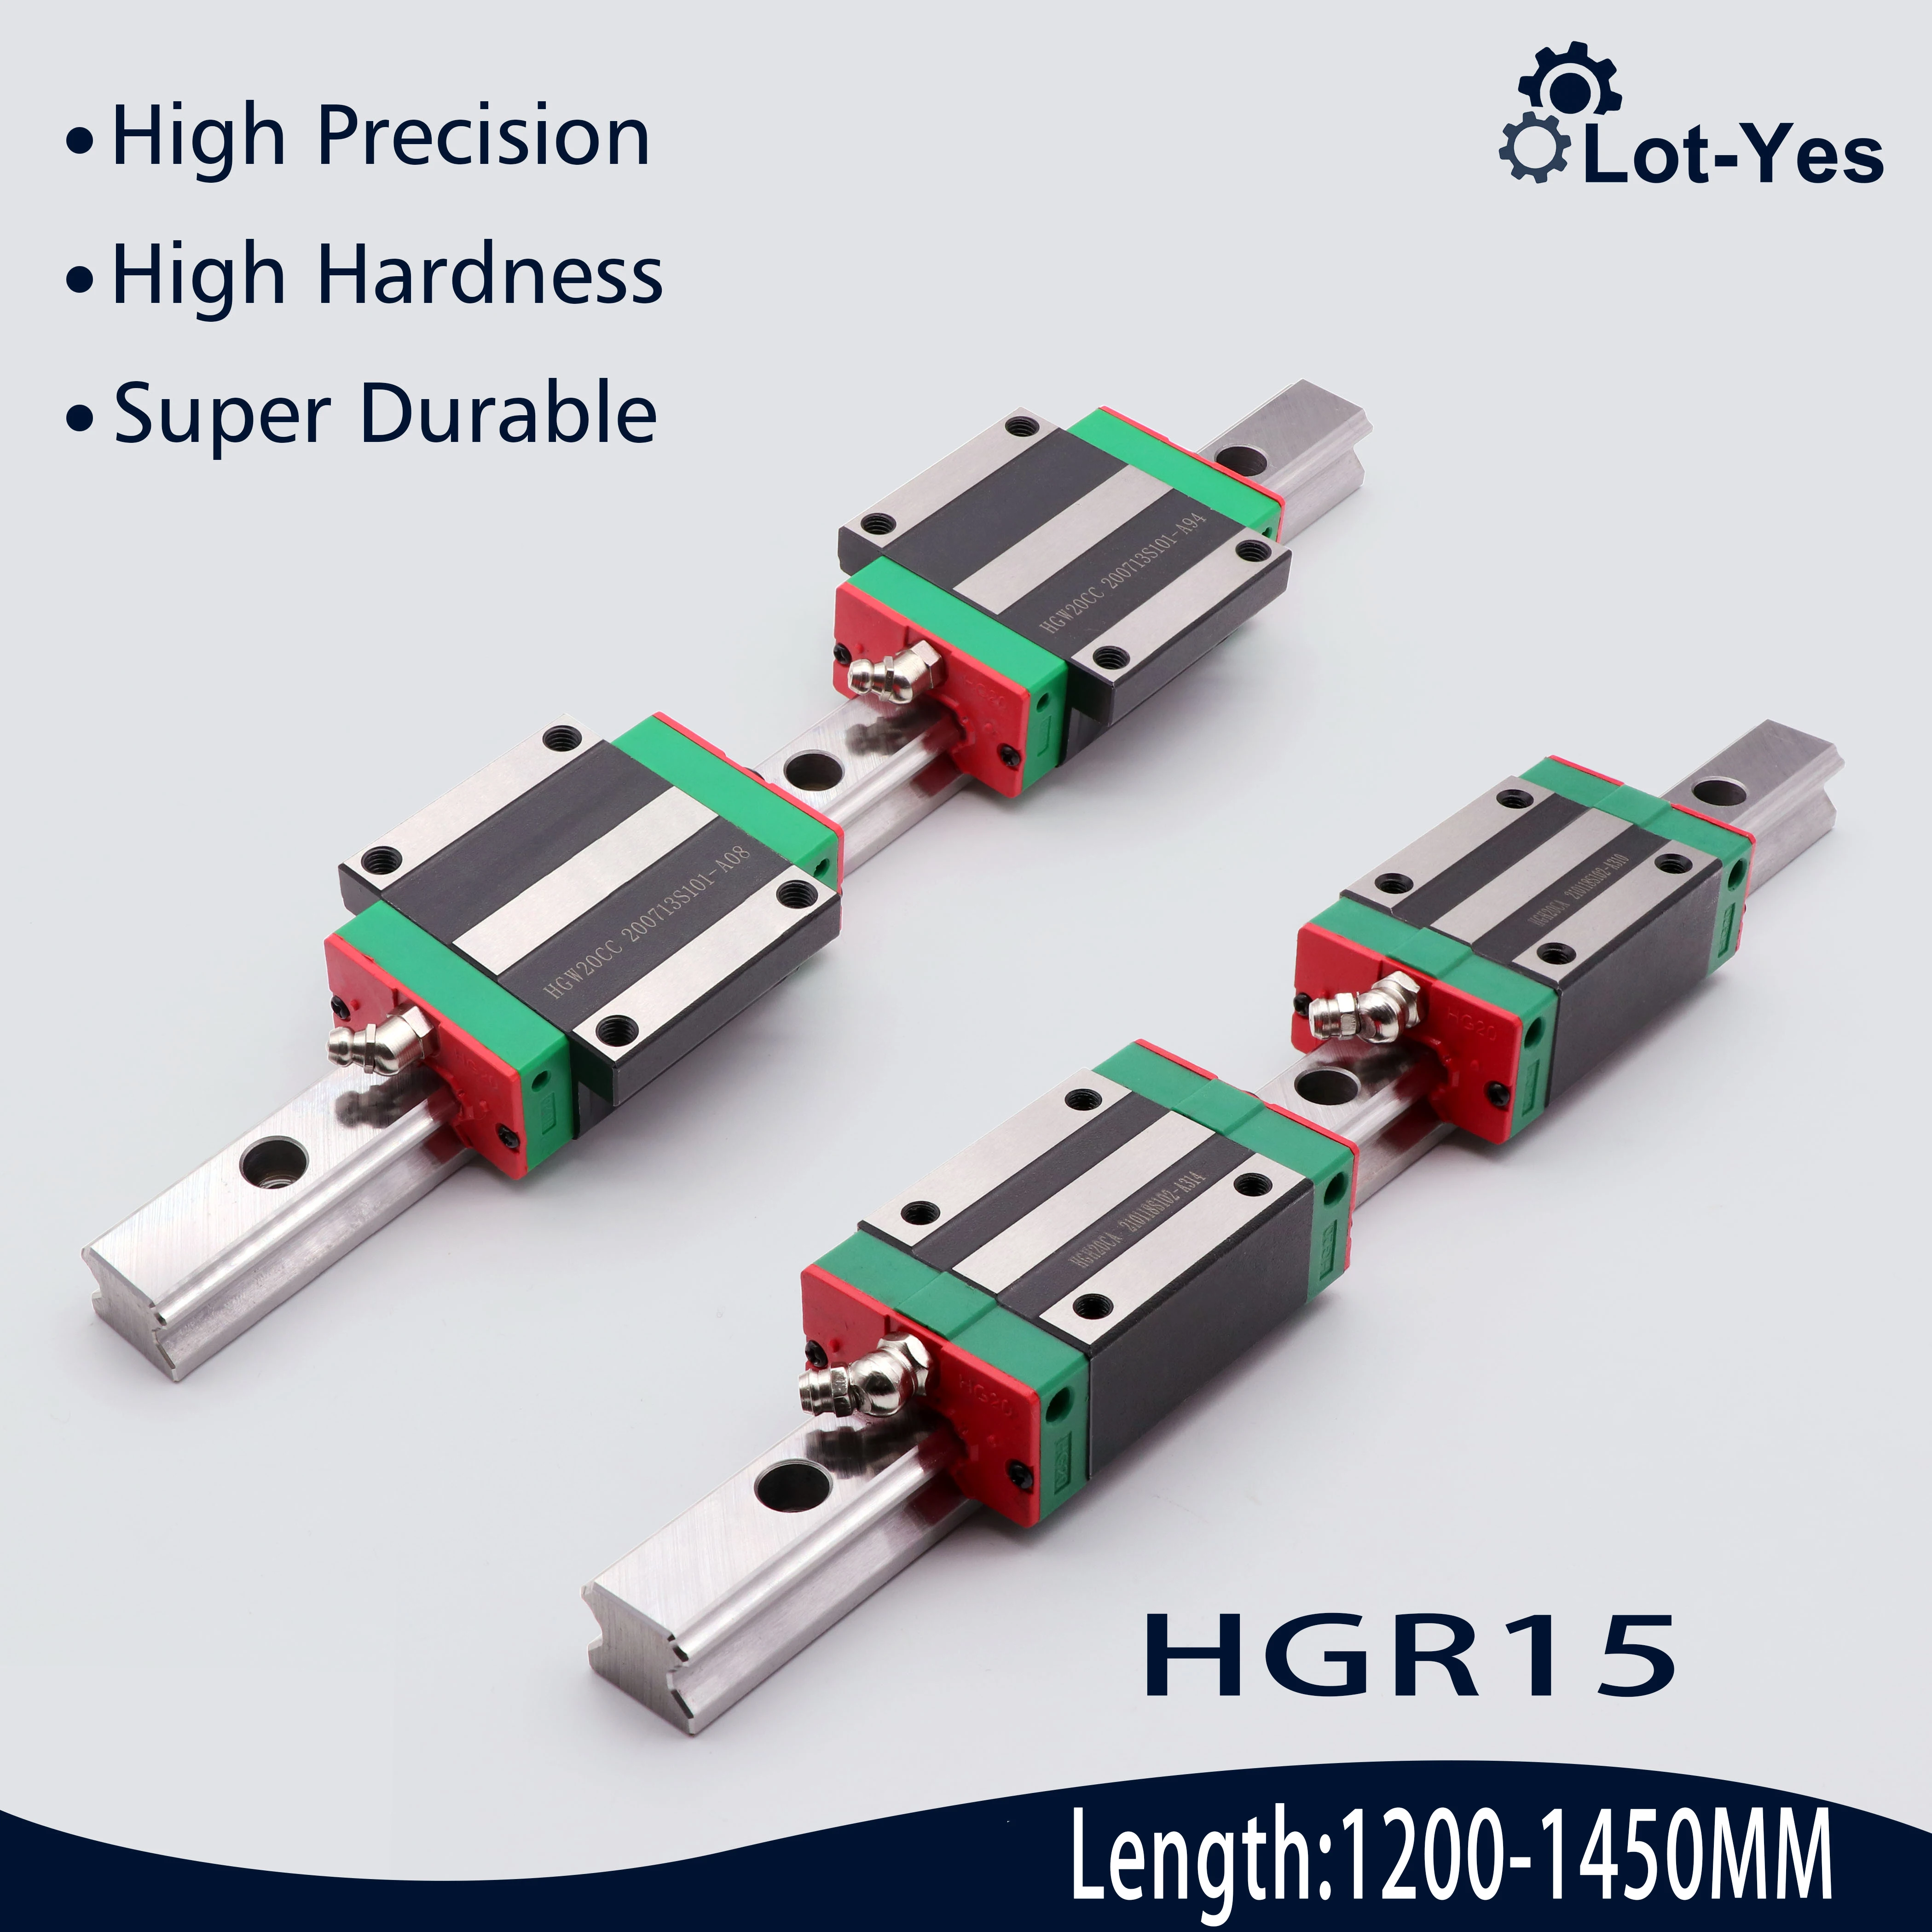 

HGR15 L: 1200 - 1450 MM + HGH15CA HGW15CC Linear Guide Rails Slide Block Square Carriages For Hiwin HGR 15 CNC Router Kit